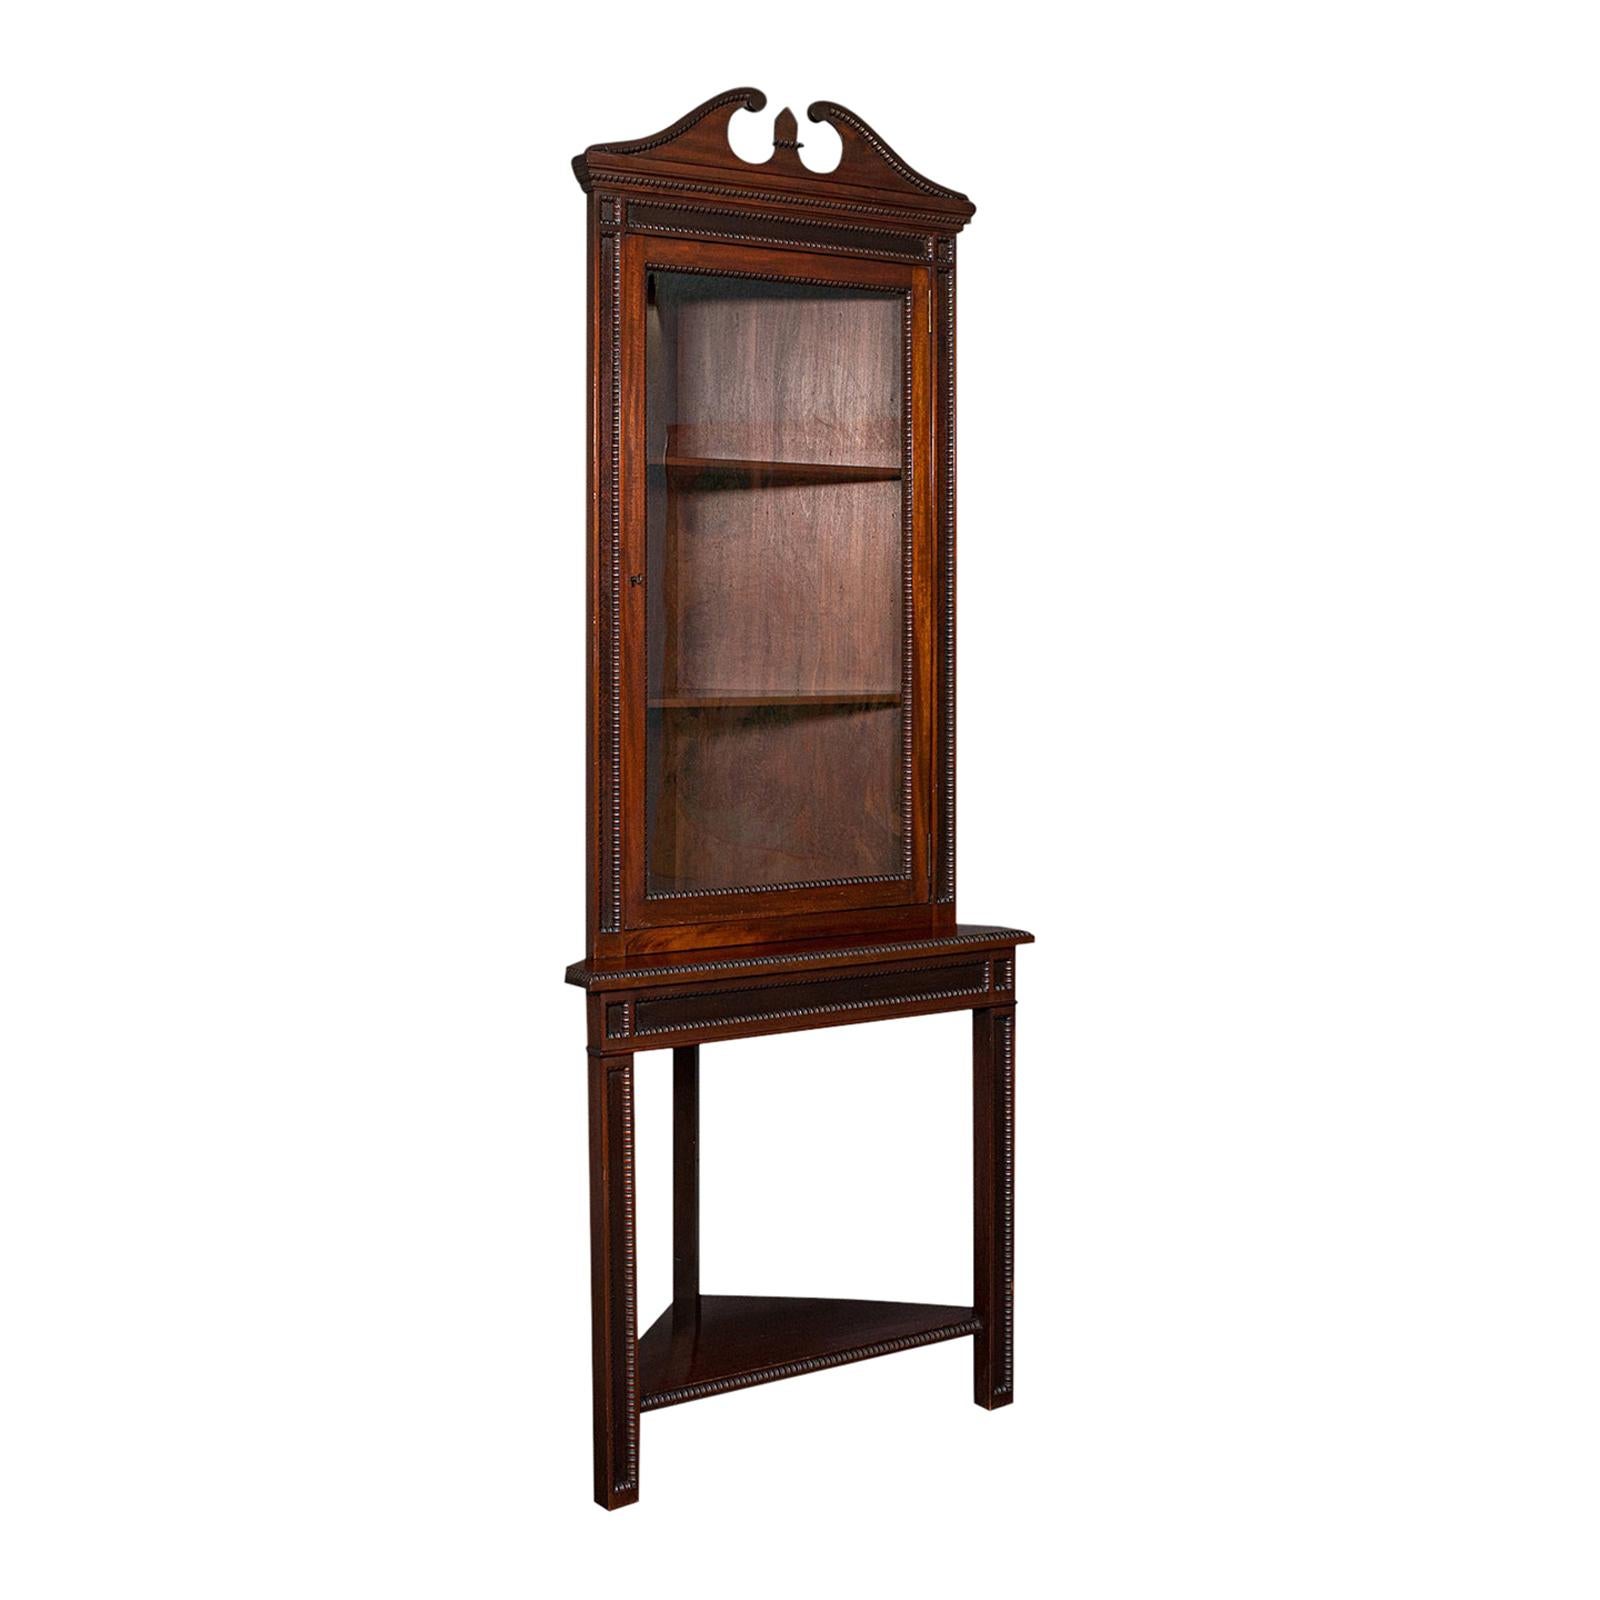 Tall Antique Corner Cabinet on Stand, English, Mahogany, Display Cupboard, 1900